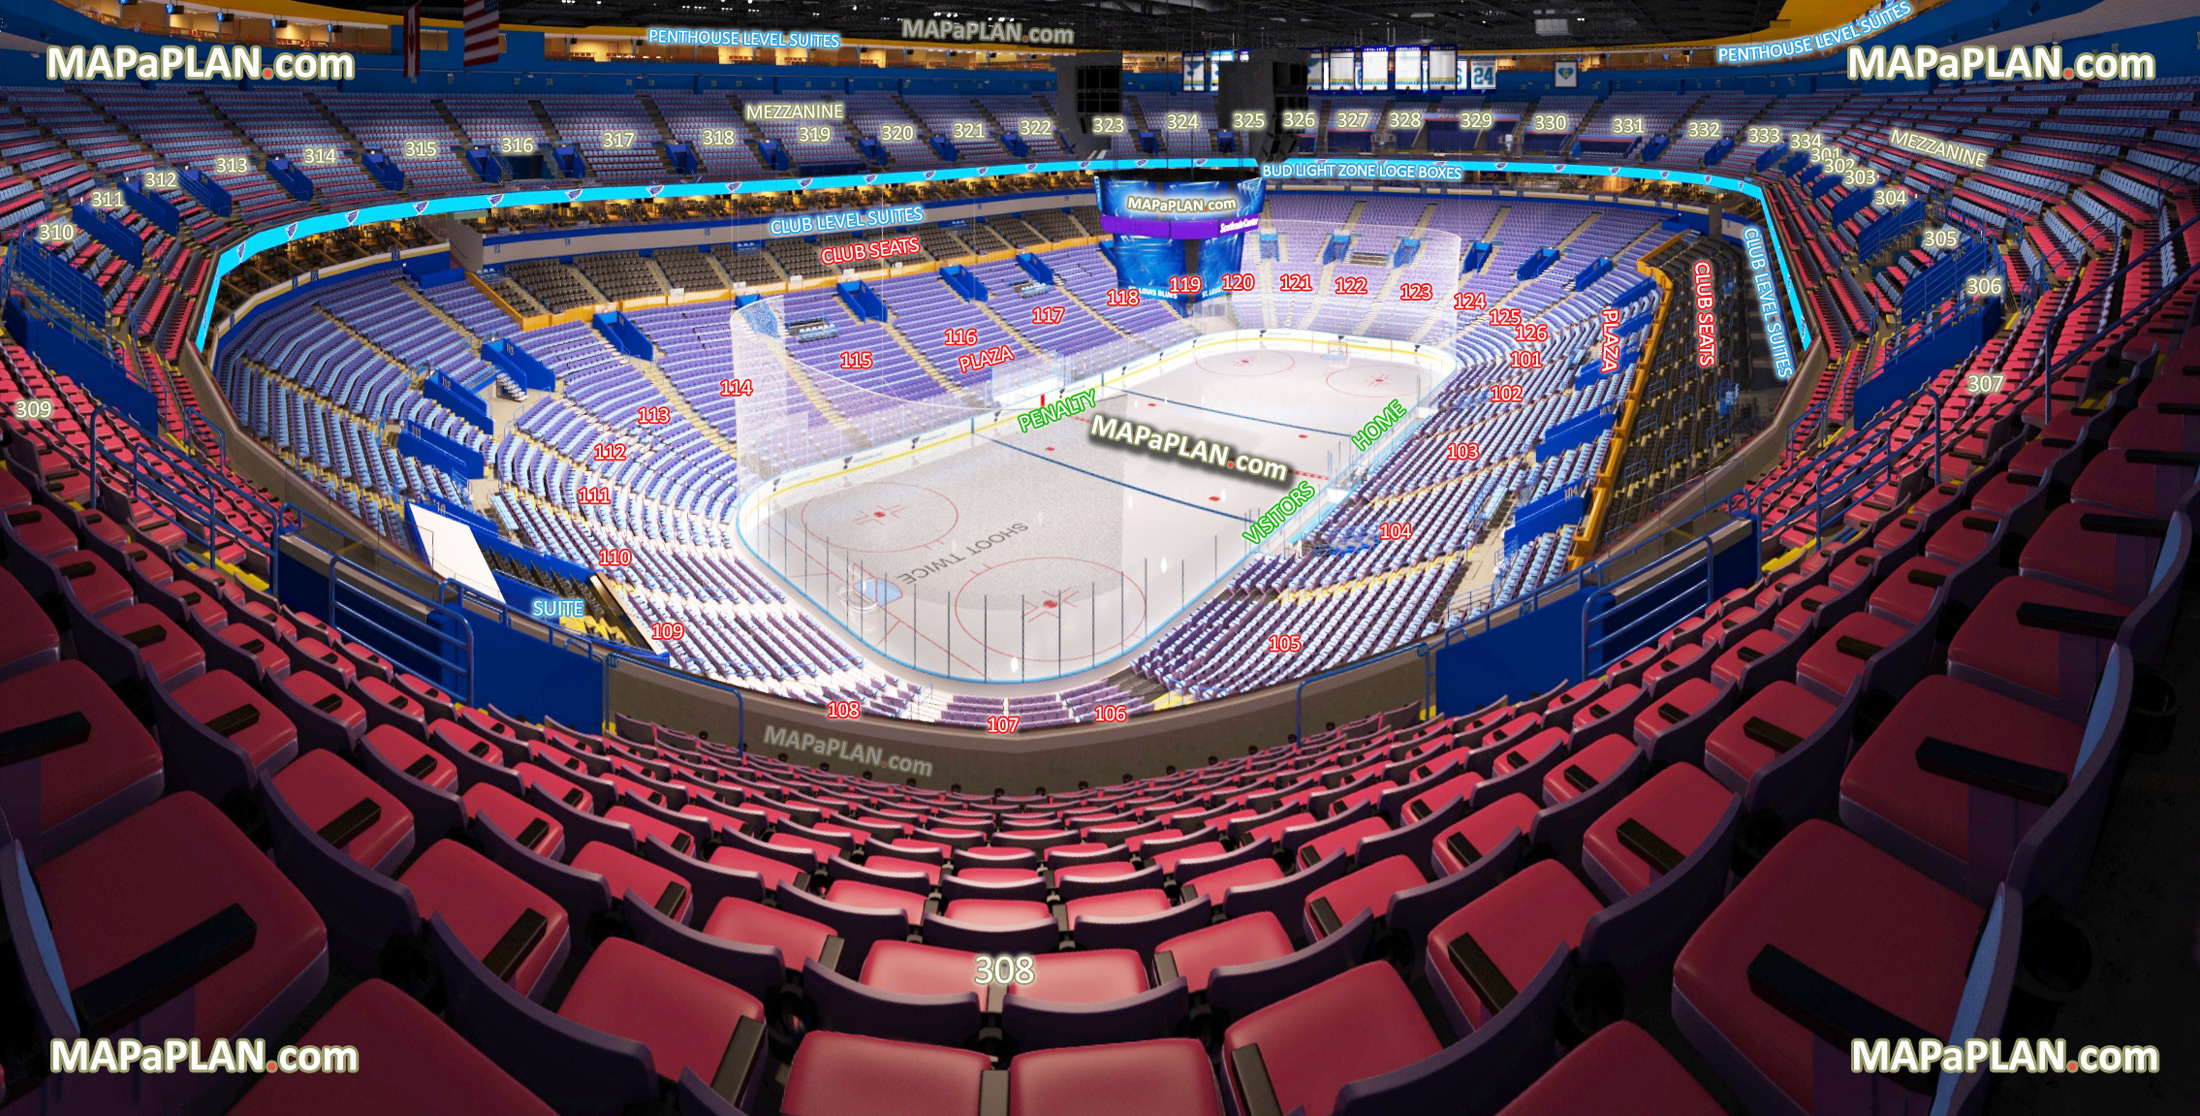 view section 308 row n seat 12 ice hockey rink blues home bench visitors penalty club penthouse level suites bud light zone loge boxes St. Louis Scottrade Center seating chart